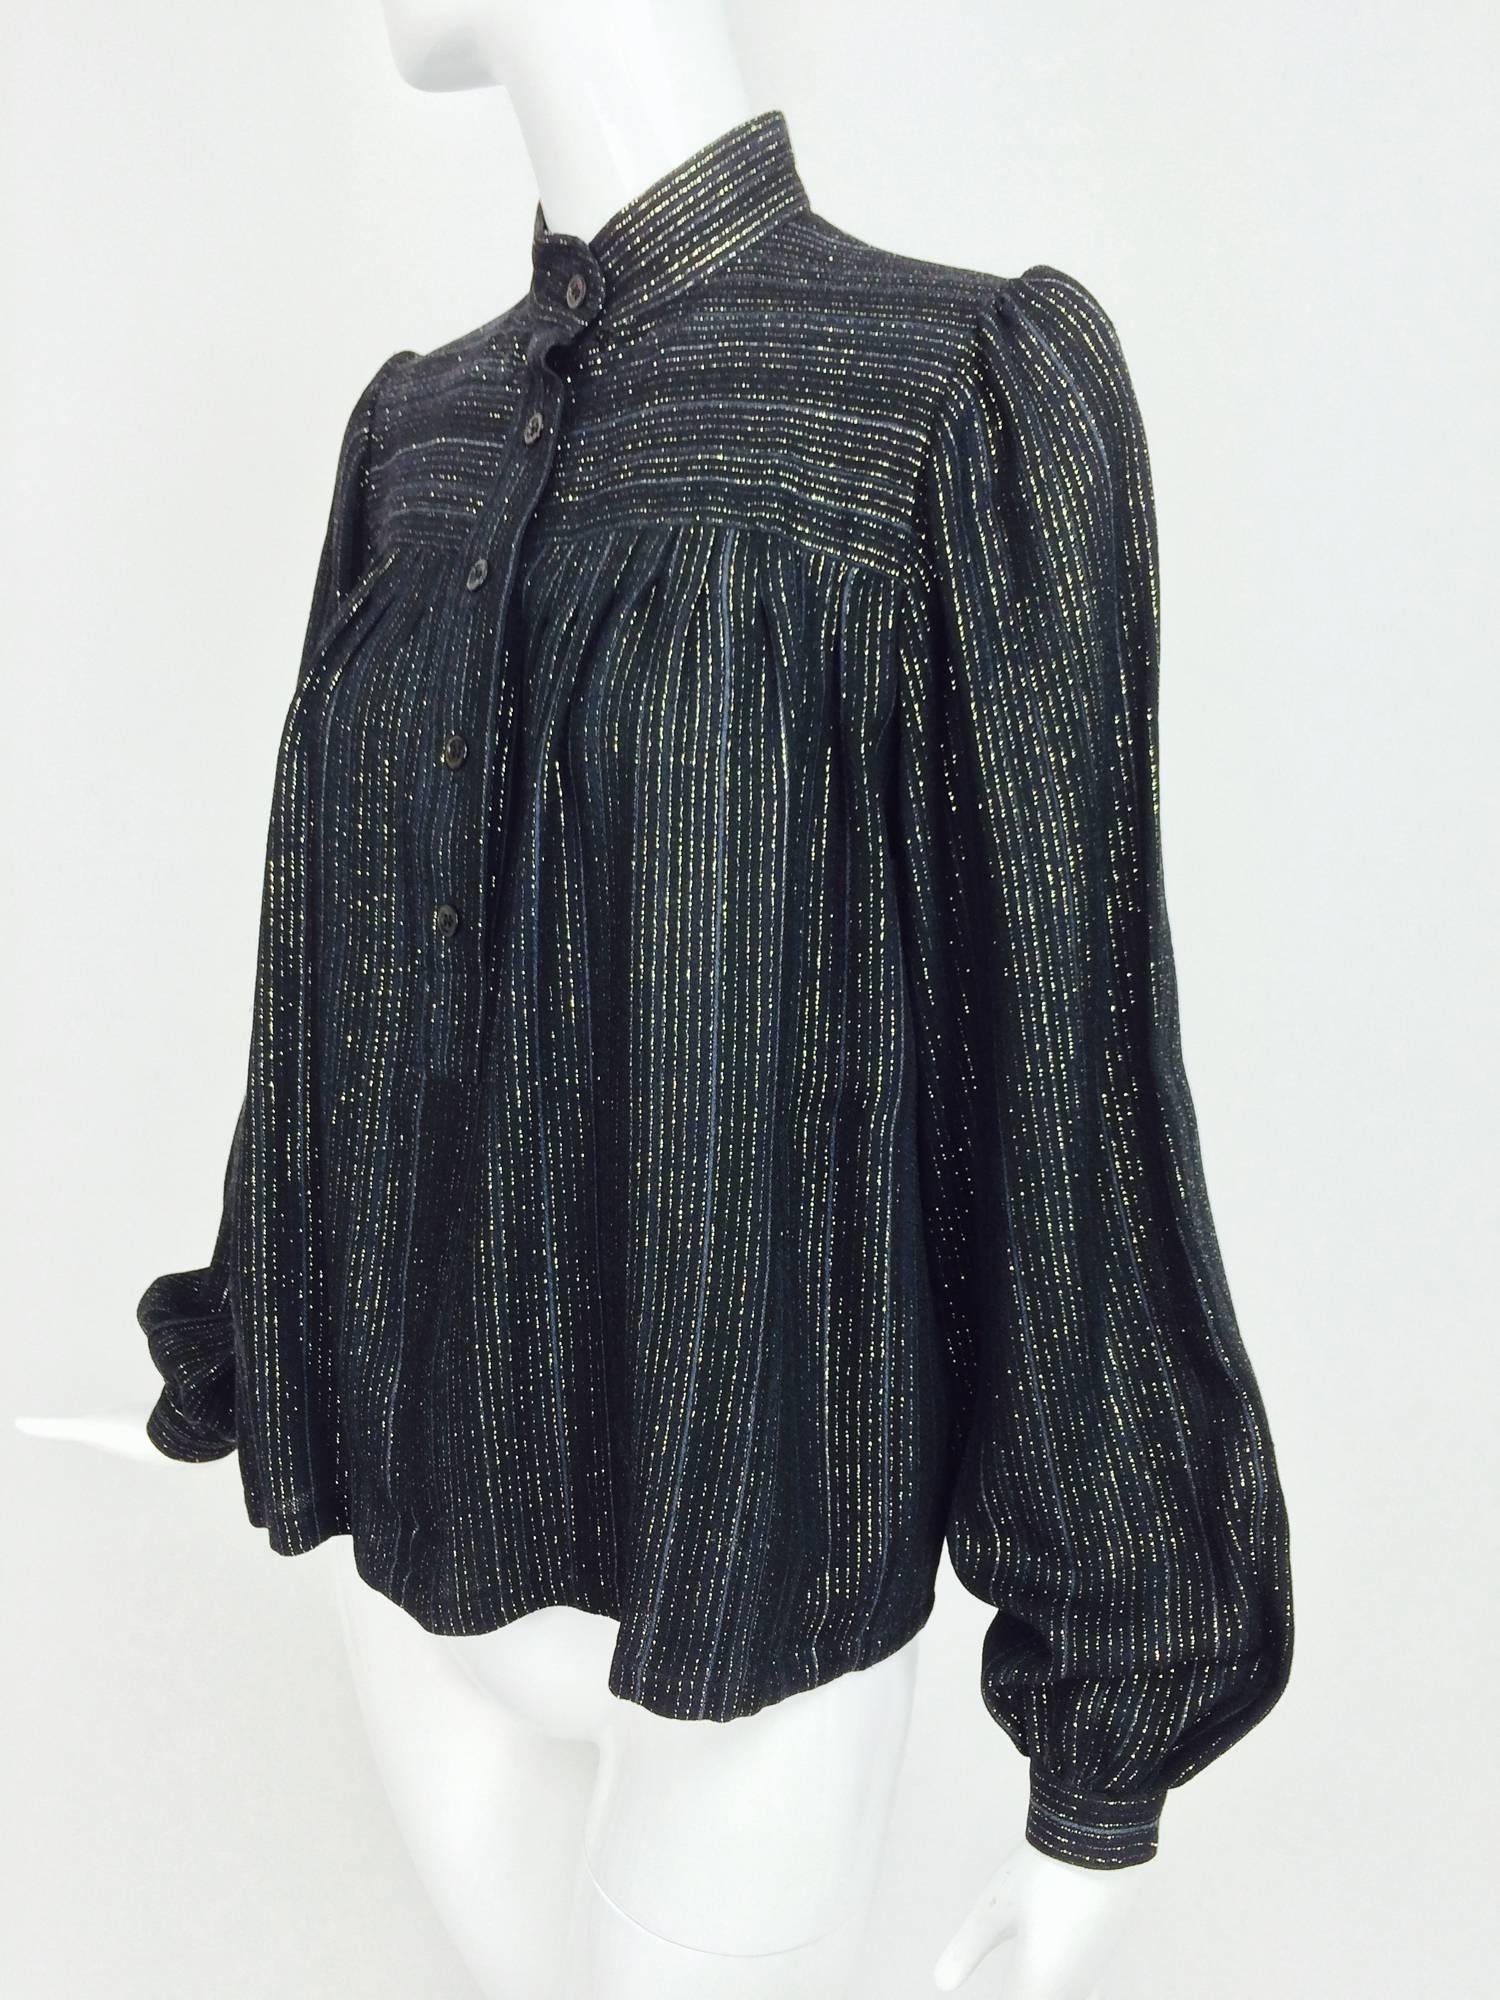 Vintage Yves Saint Laurent YSL black metallic stripe gauze peasant top from the 1970s...Long sleeve blouse has full sleeves with button cuffs...Yoke front and back with button front placket, the blouse falls semi full below yoke...Band collar...Fits